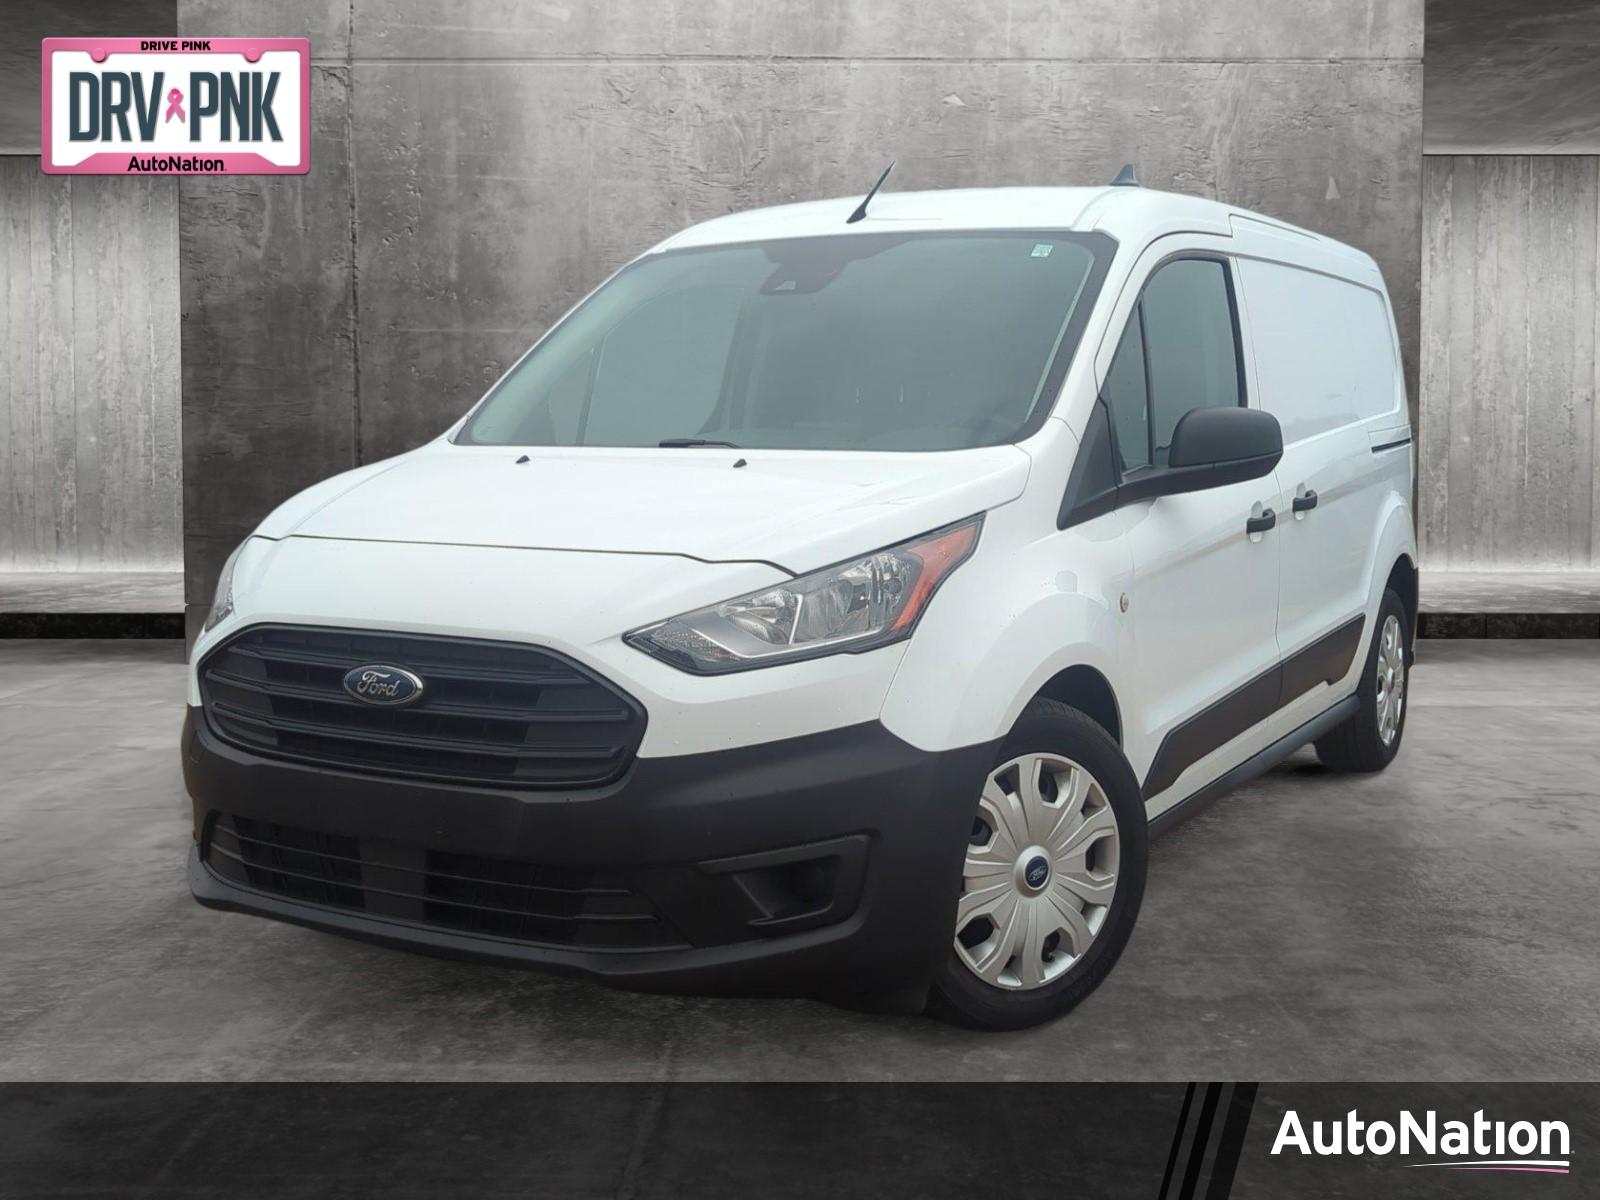 2022 Ford Transit Connect Van Vehicle Photo in Memphis, TN 38115